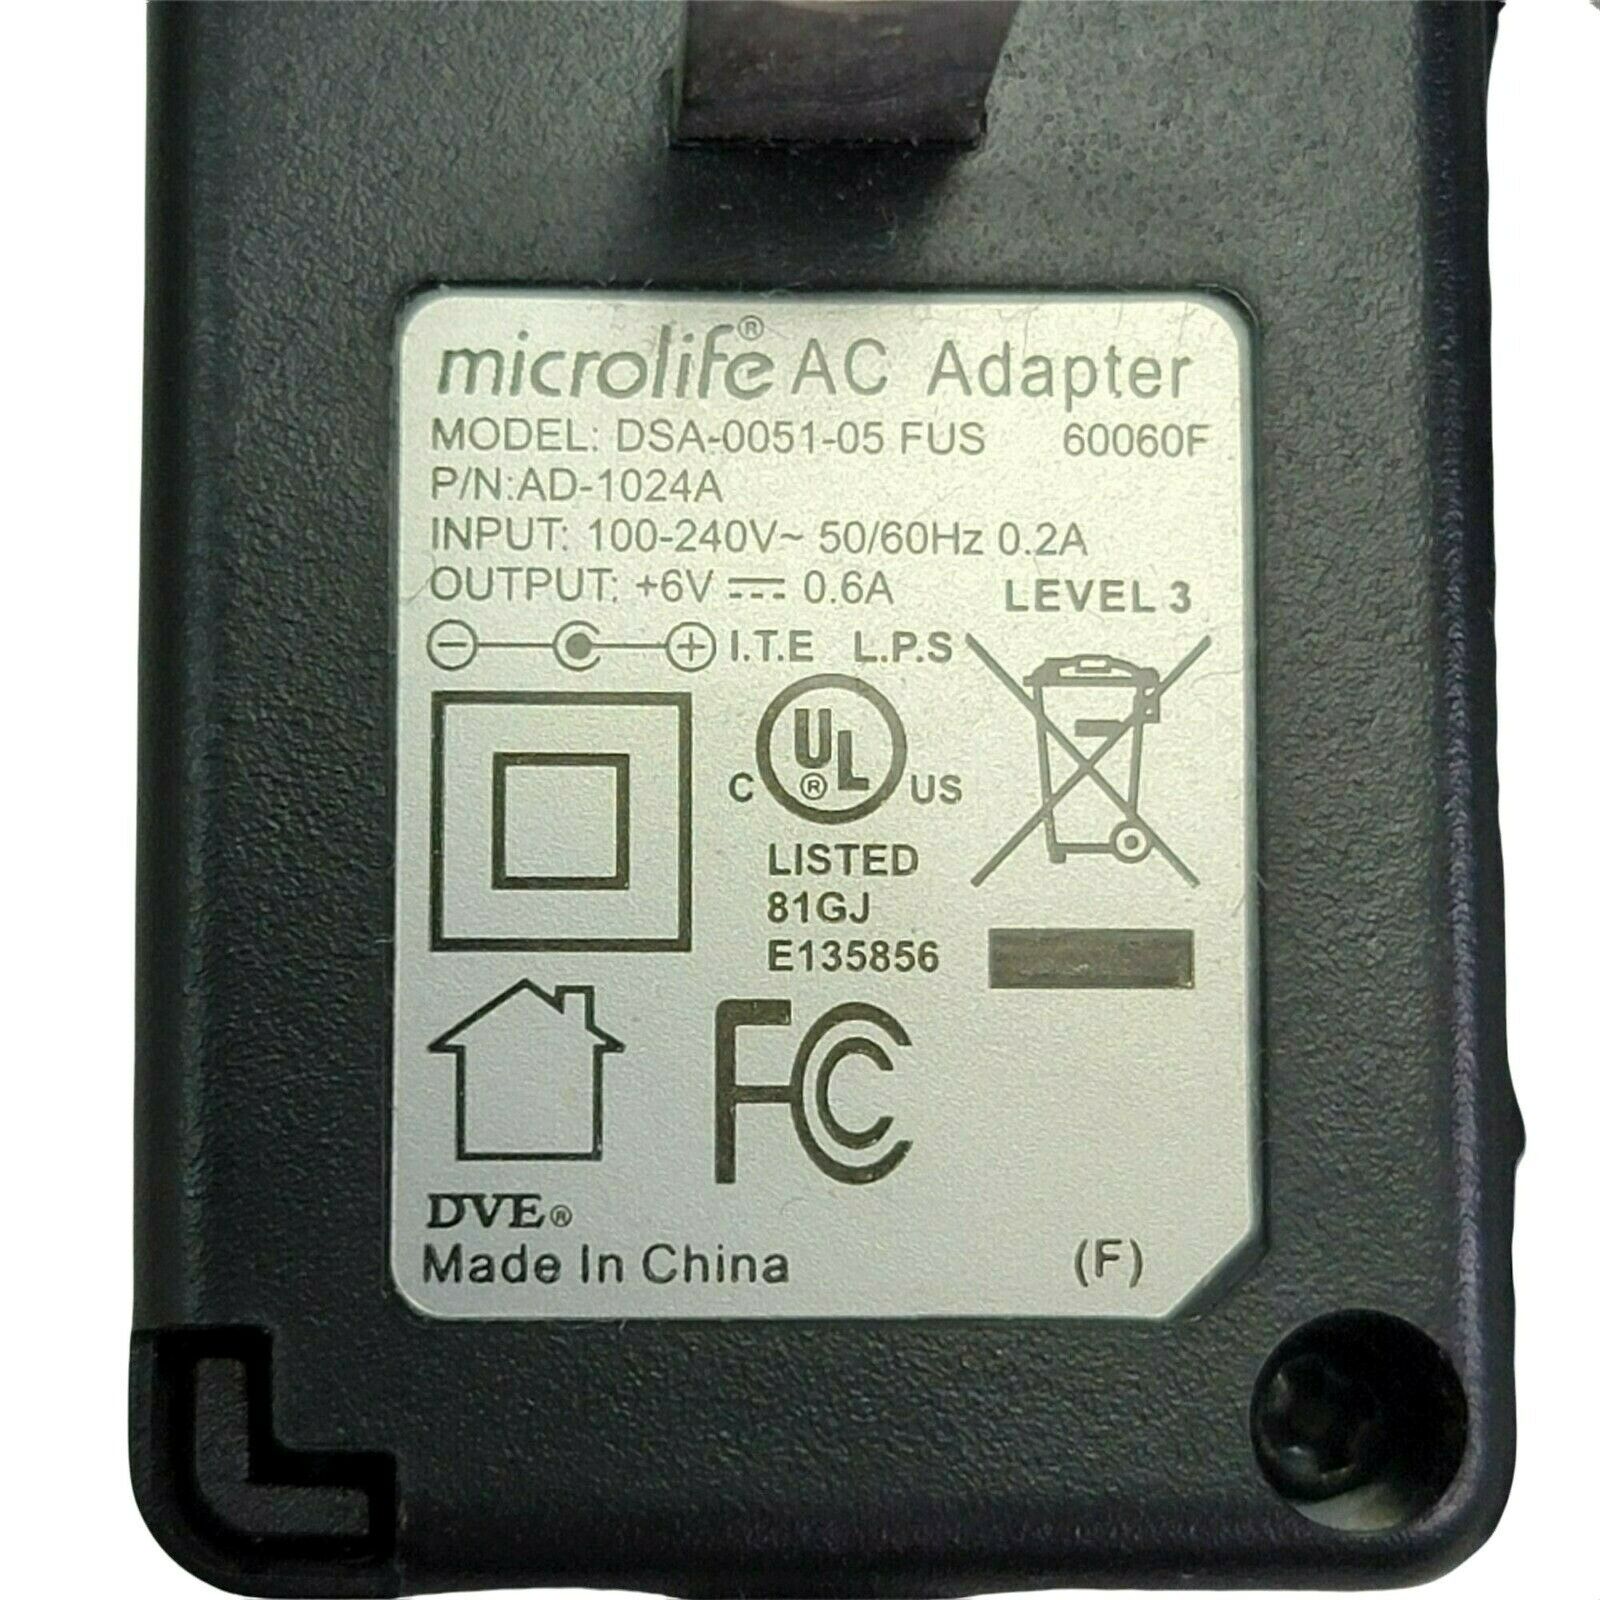 Microlife DVE DSA-0051-05 FUS AC Adapter 6.5V 0.65A Power Supply Charger Compatible Brand: MicroLife Type: Adapter C - Click Image to Close